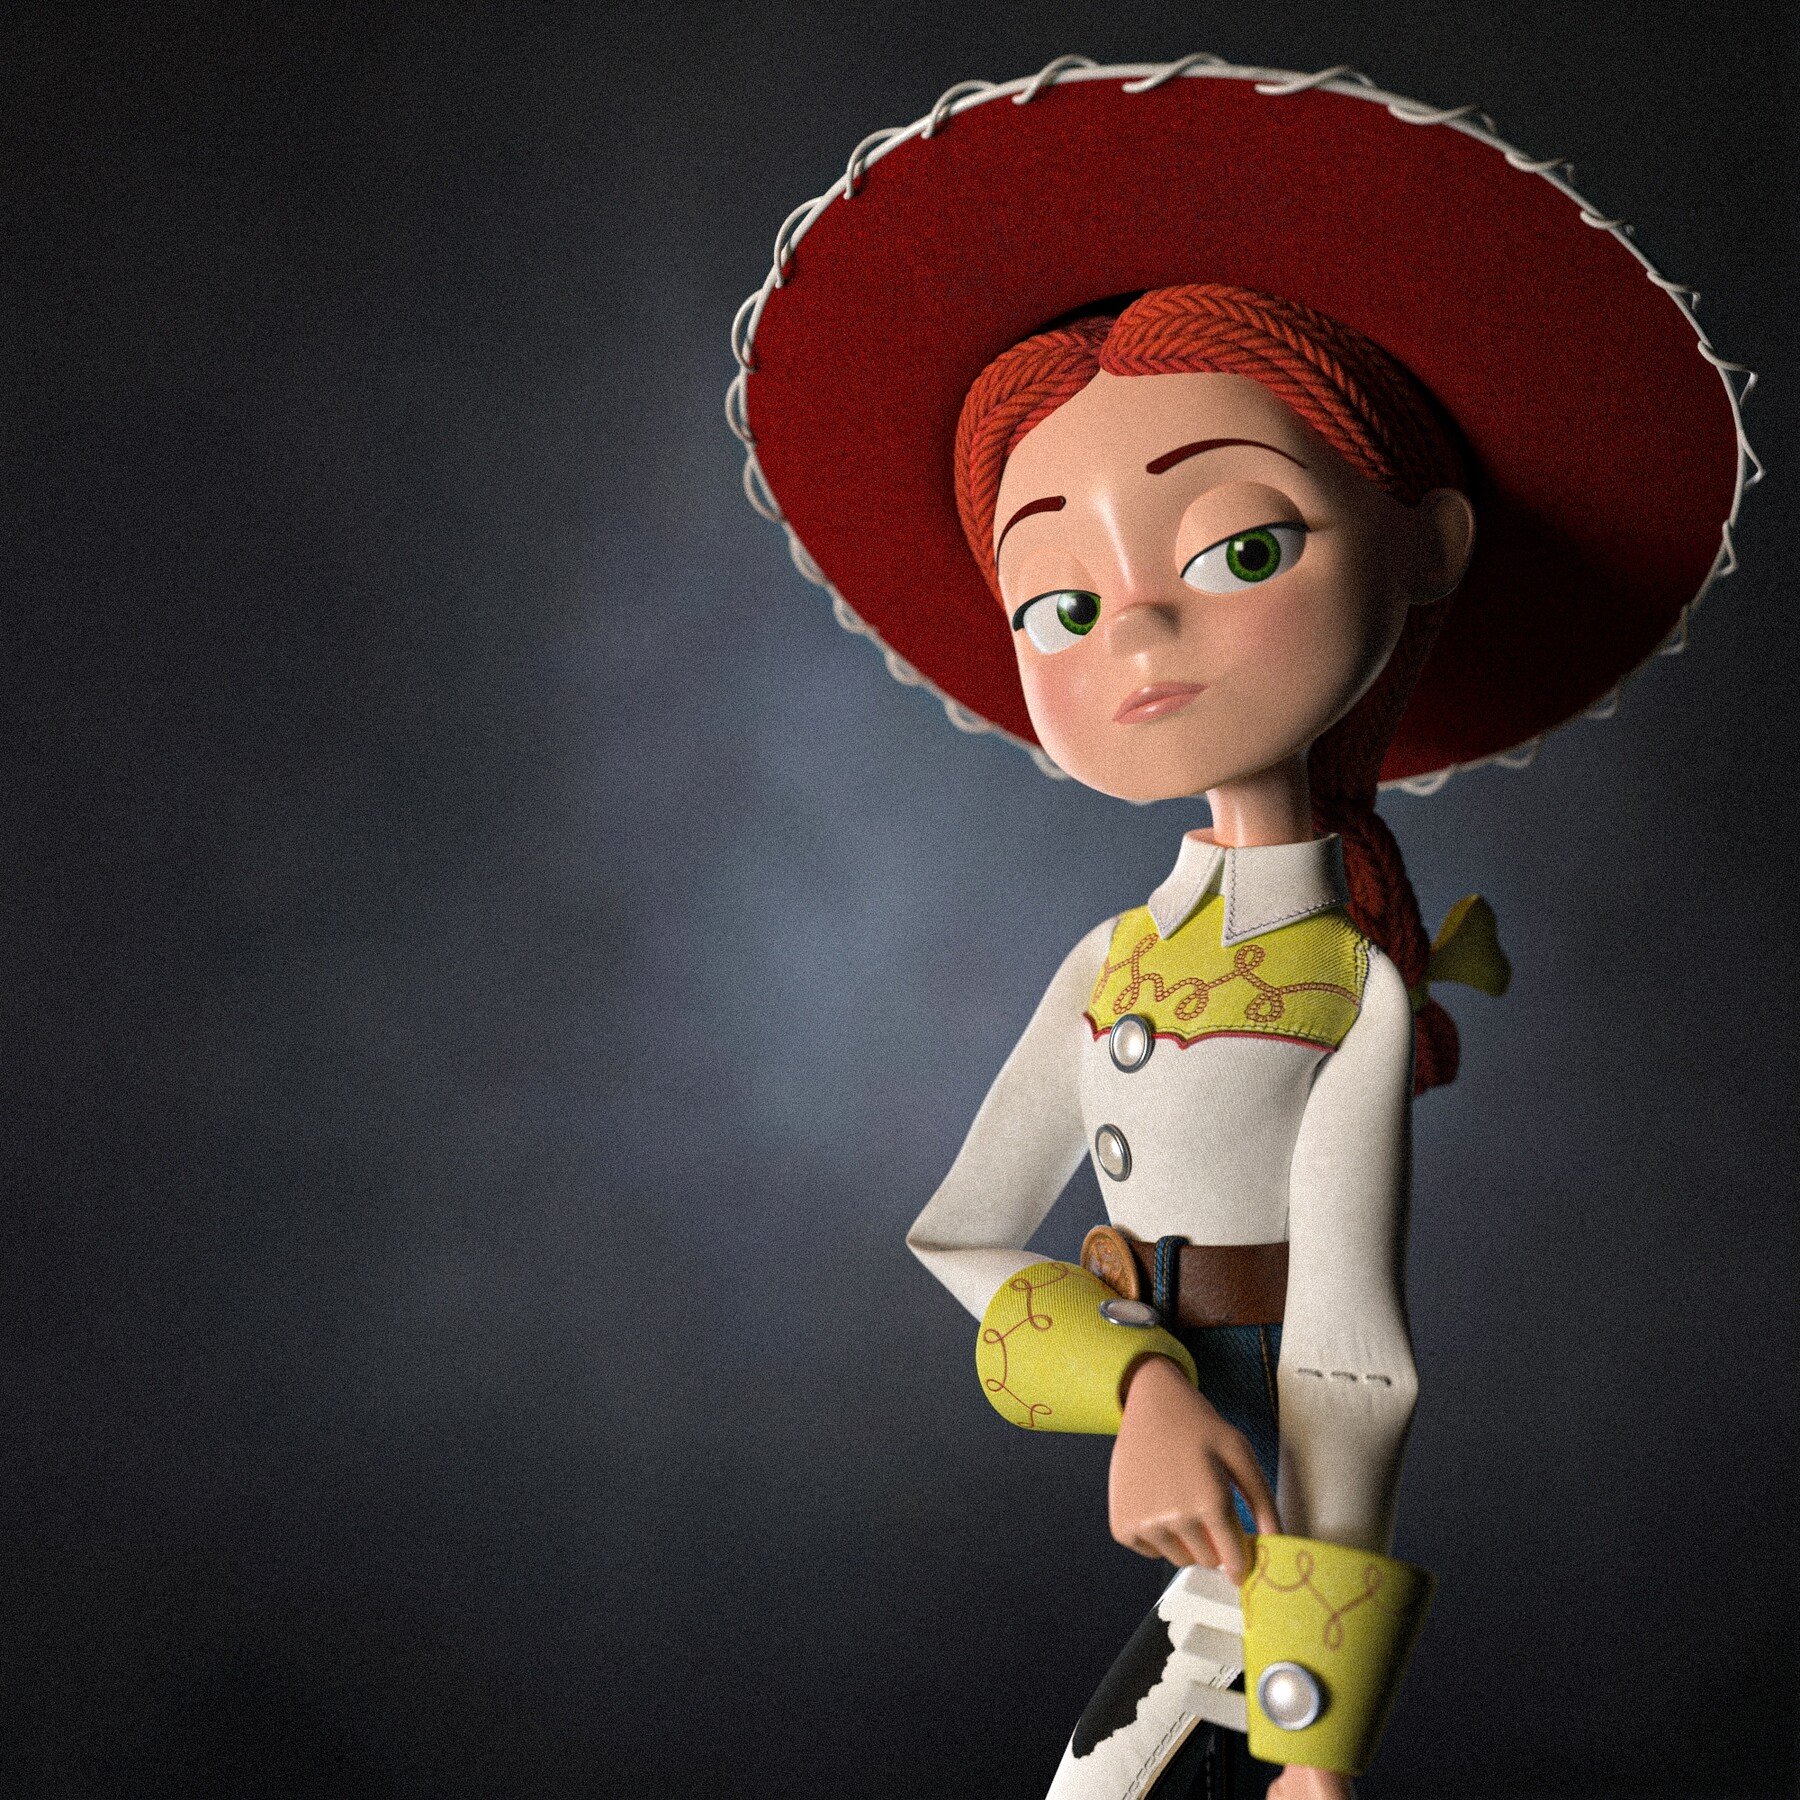 Jessie from Toy Story This is a high quality